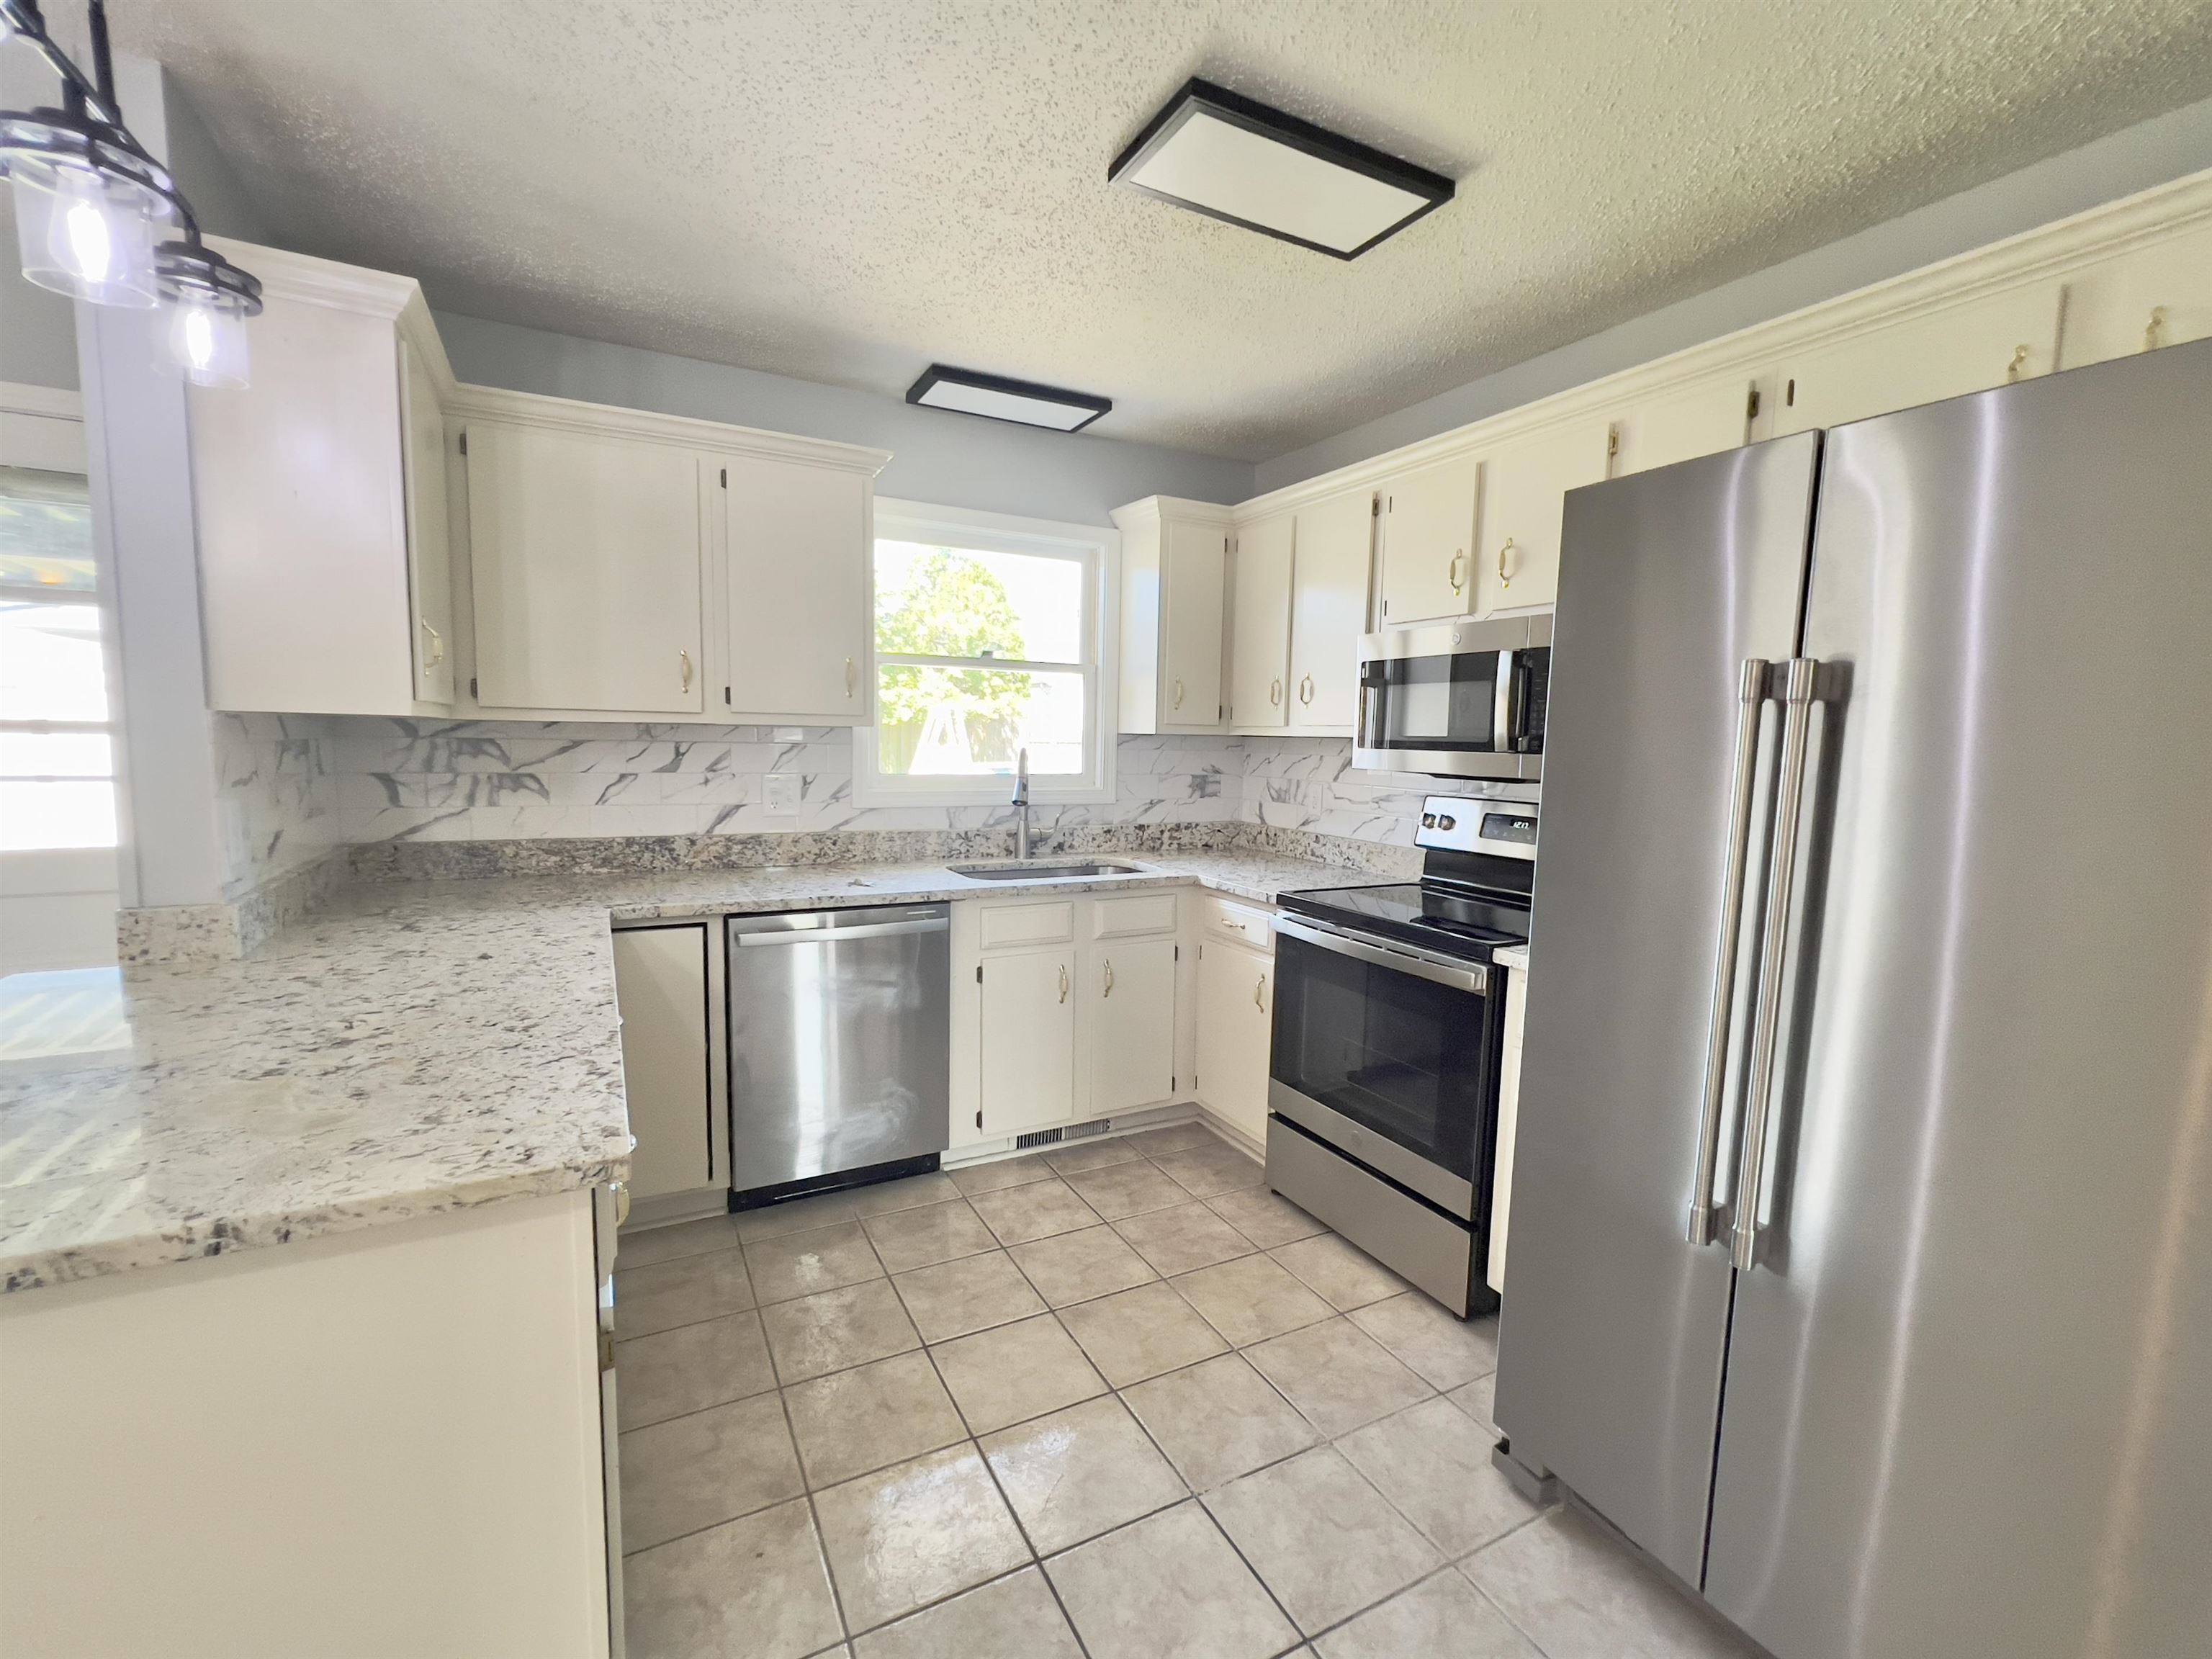 All new stainless steel appliances and granite countertops